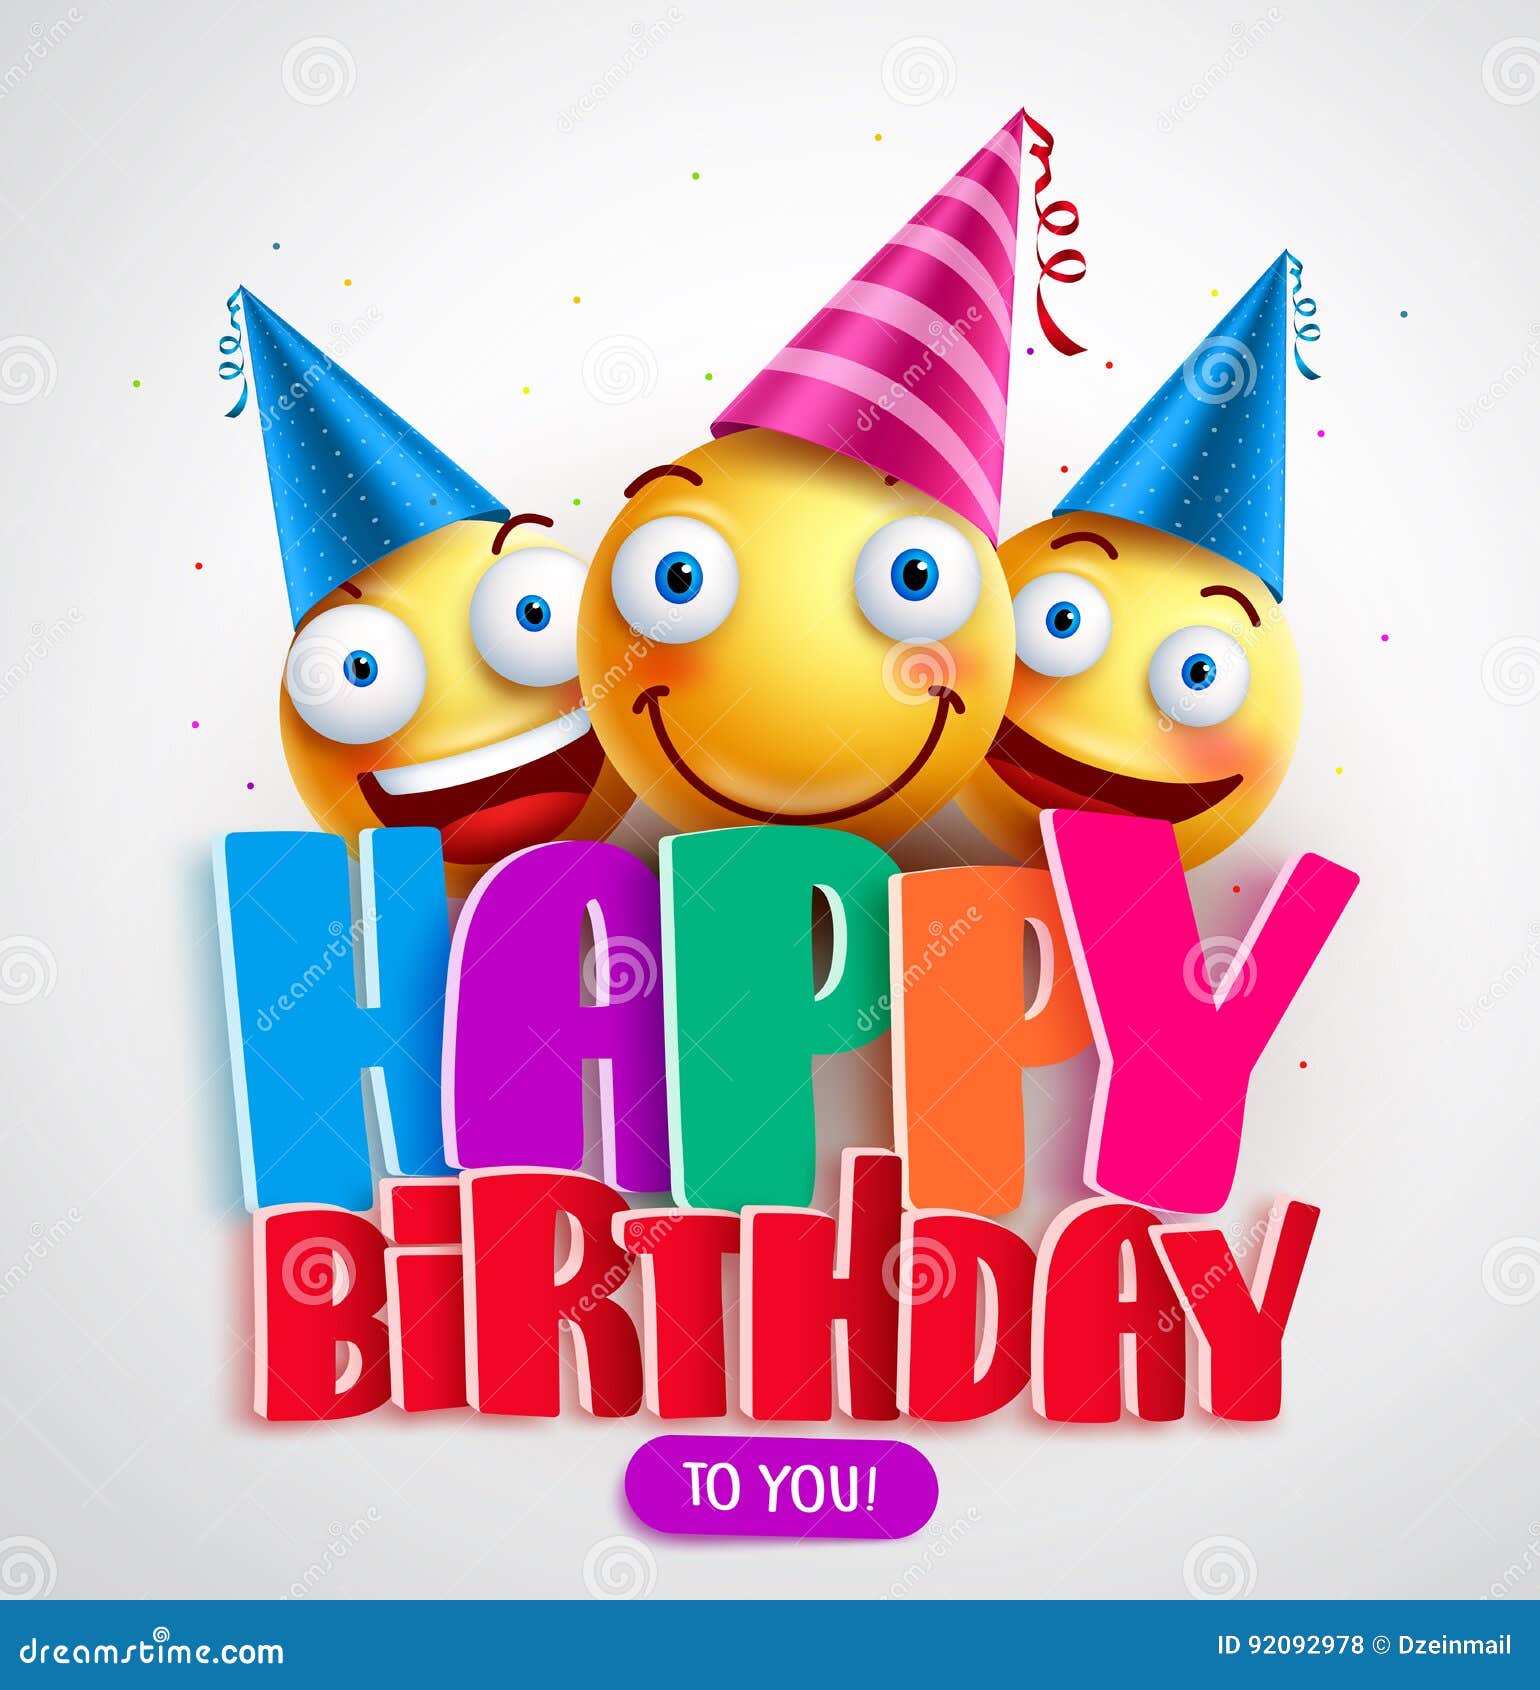 Happy Birthday To You Vector Banner Design with Funny Smileys Wearing  Birthday Hat Stock Vector - Illustration of holiday, color: 92092978